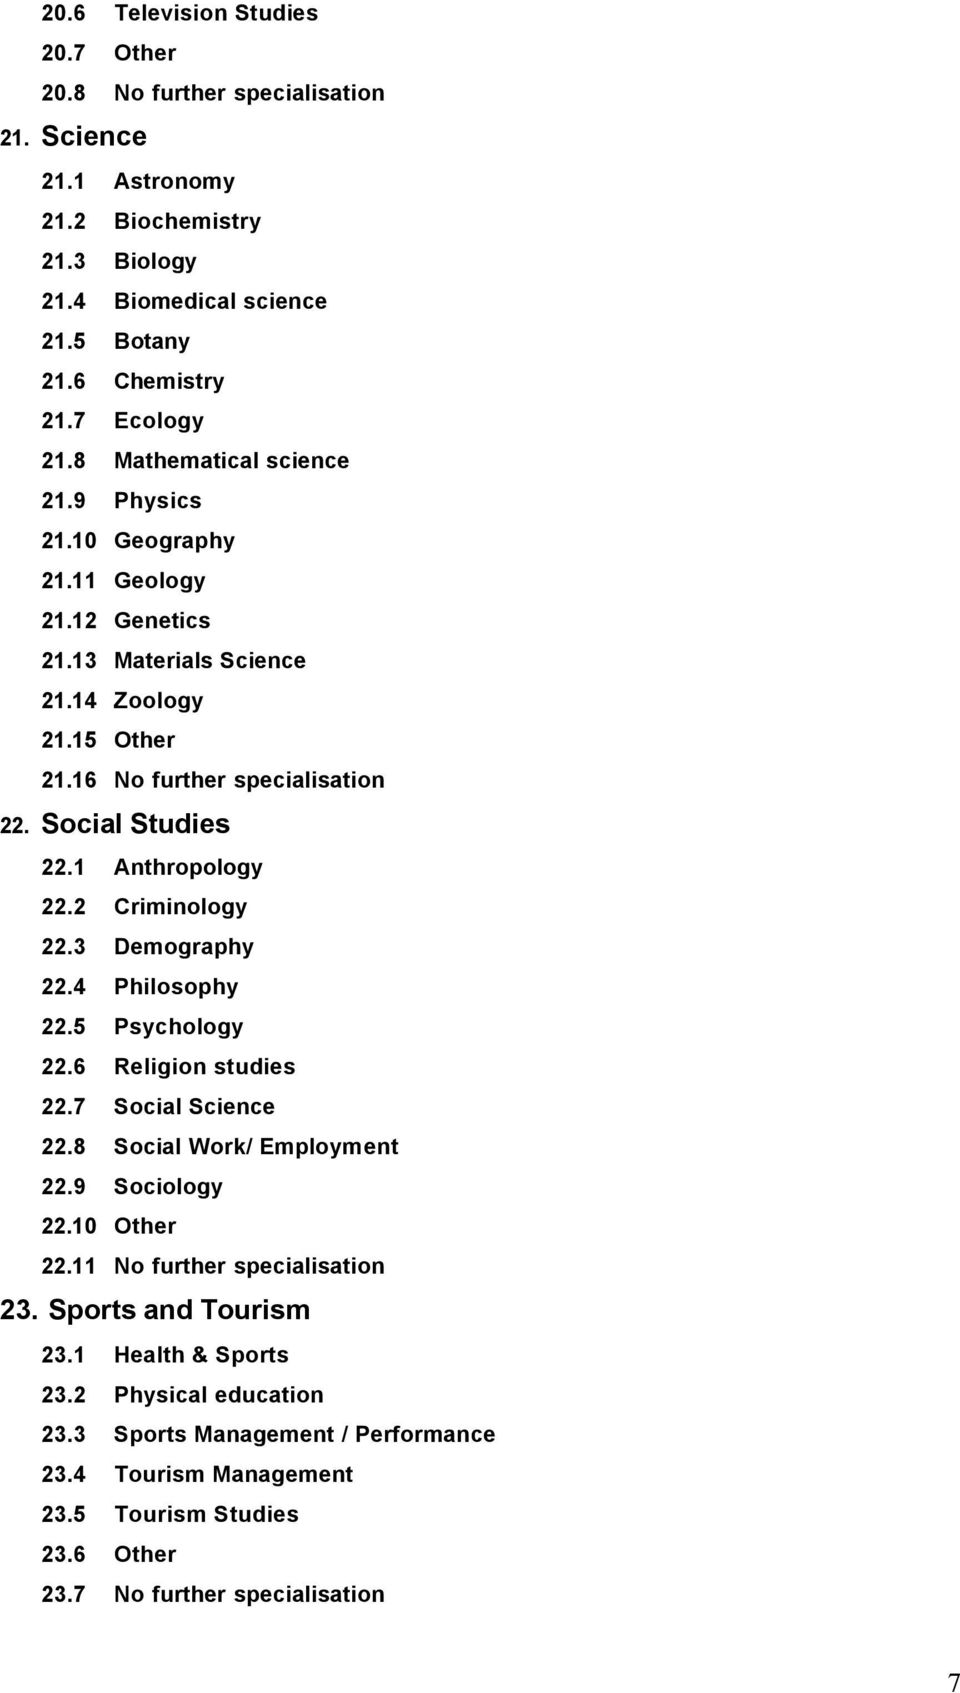 1 Anthropology 22.2 Criminology 22.3 Demography 22.4 Philosophy 22.5 Psychology 22.6 Religion studies 22.7 Social Science 22.8 Social Work/ Employment 22.9 Sociology 22.10 Other 22.